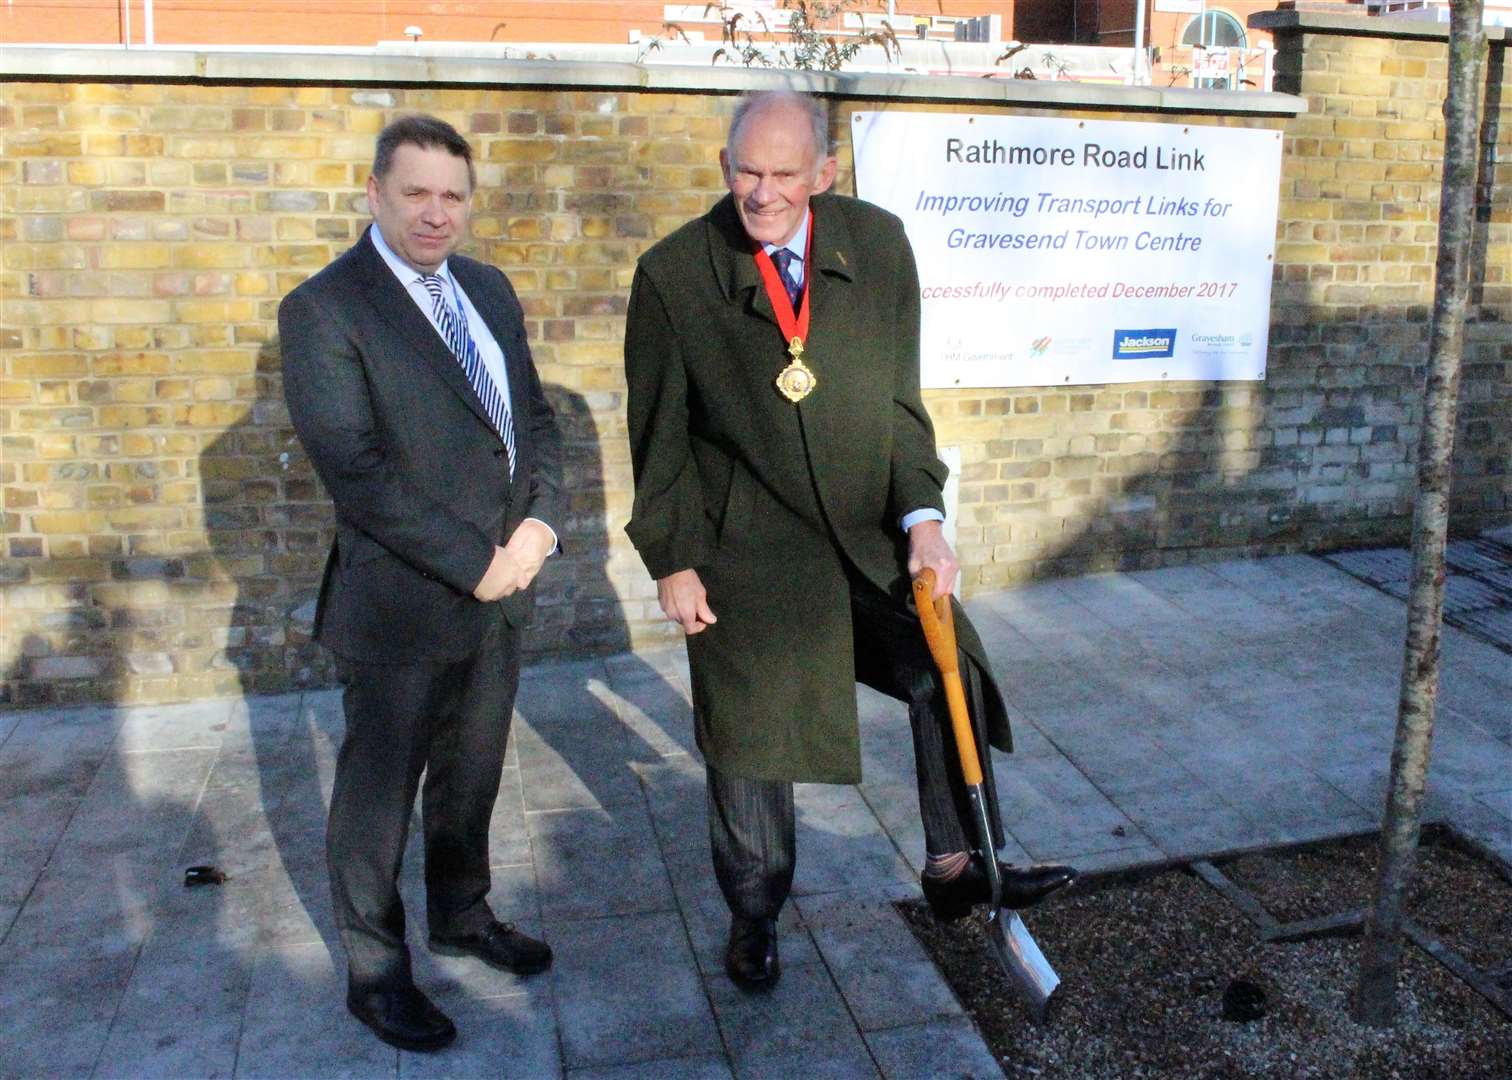 Cllr David Brazier (right) spoke at the ceremony to mark the completion of the Rathmore Road improvement scheme. He is pictured with John Knight, then deputy leader of Gravesham council.